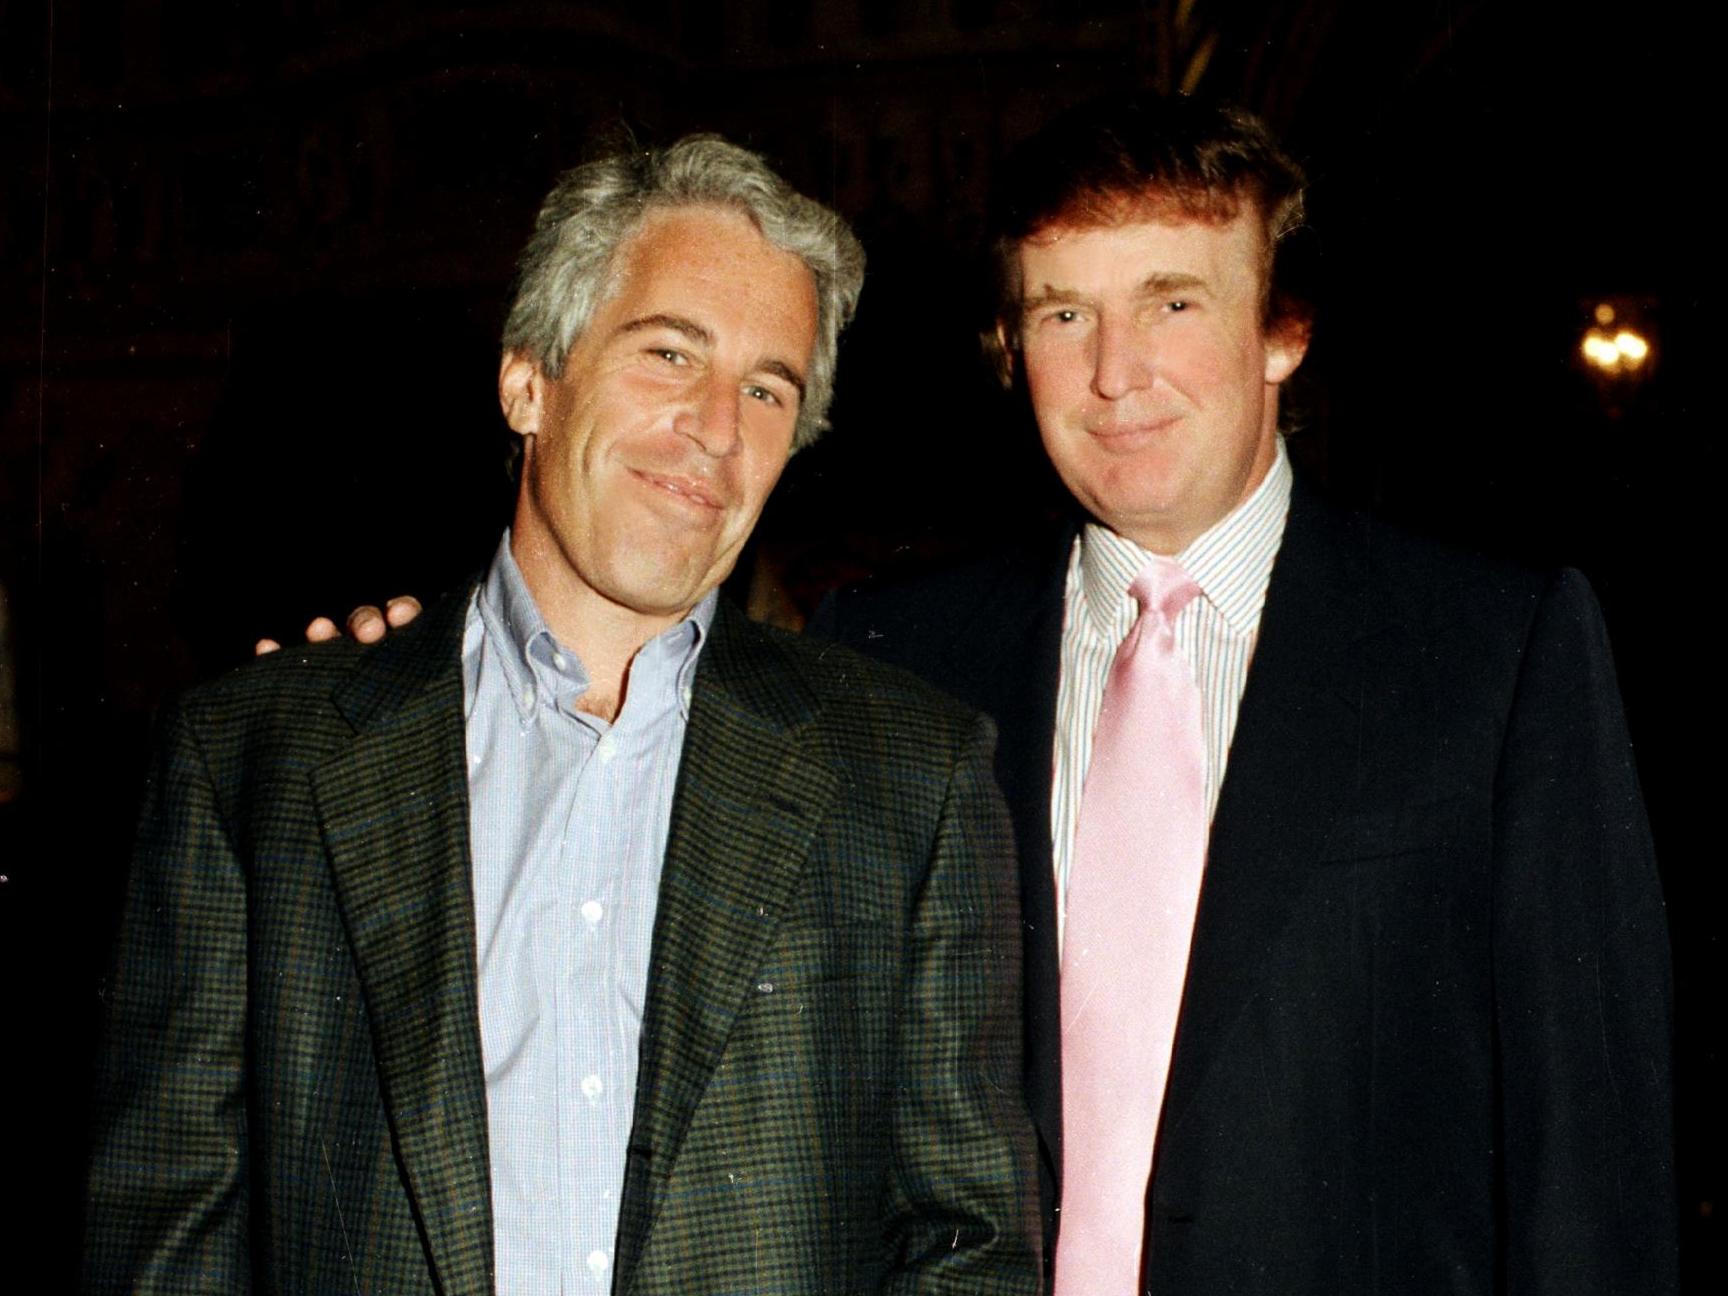 Jeffrey Epstein (left) and Donald Trump (right)